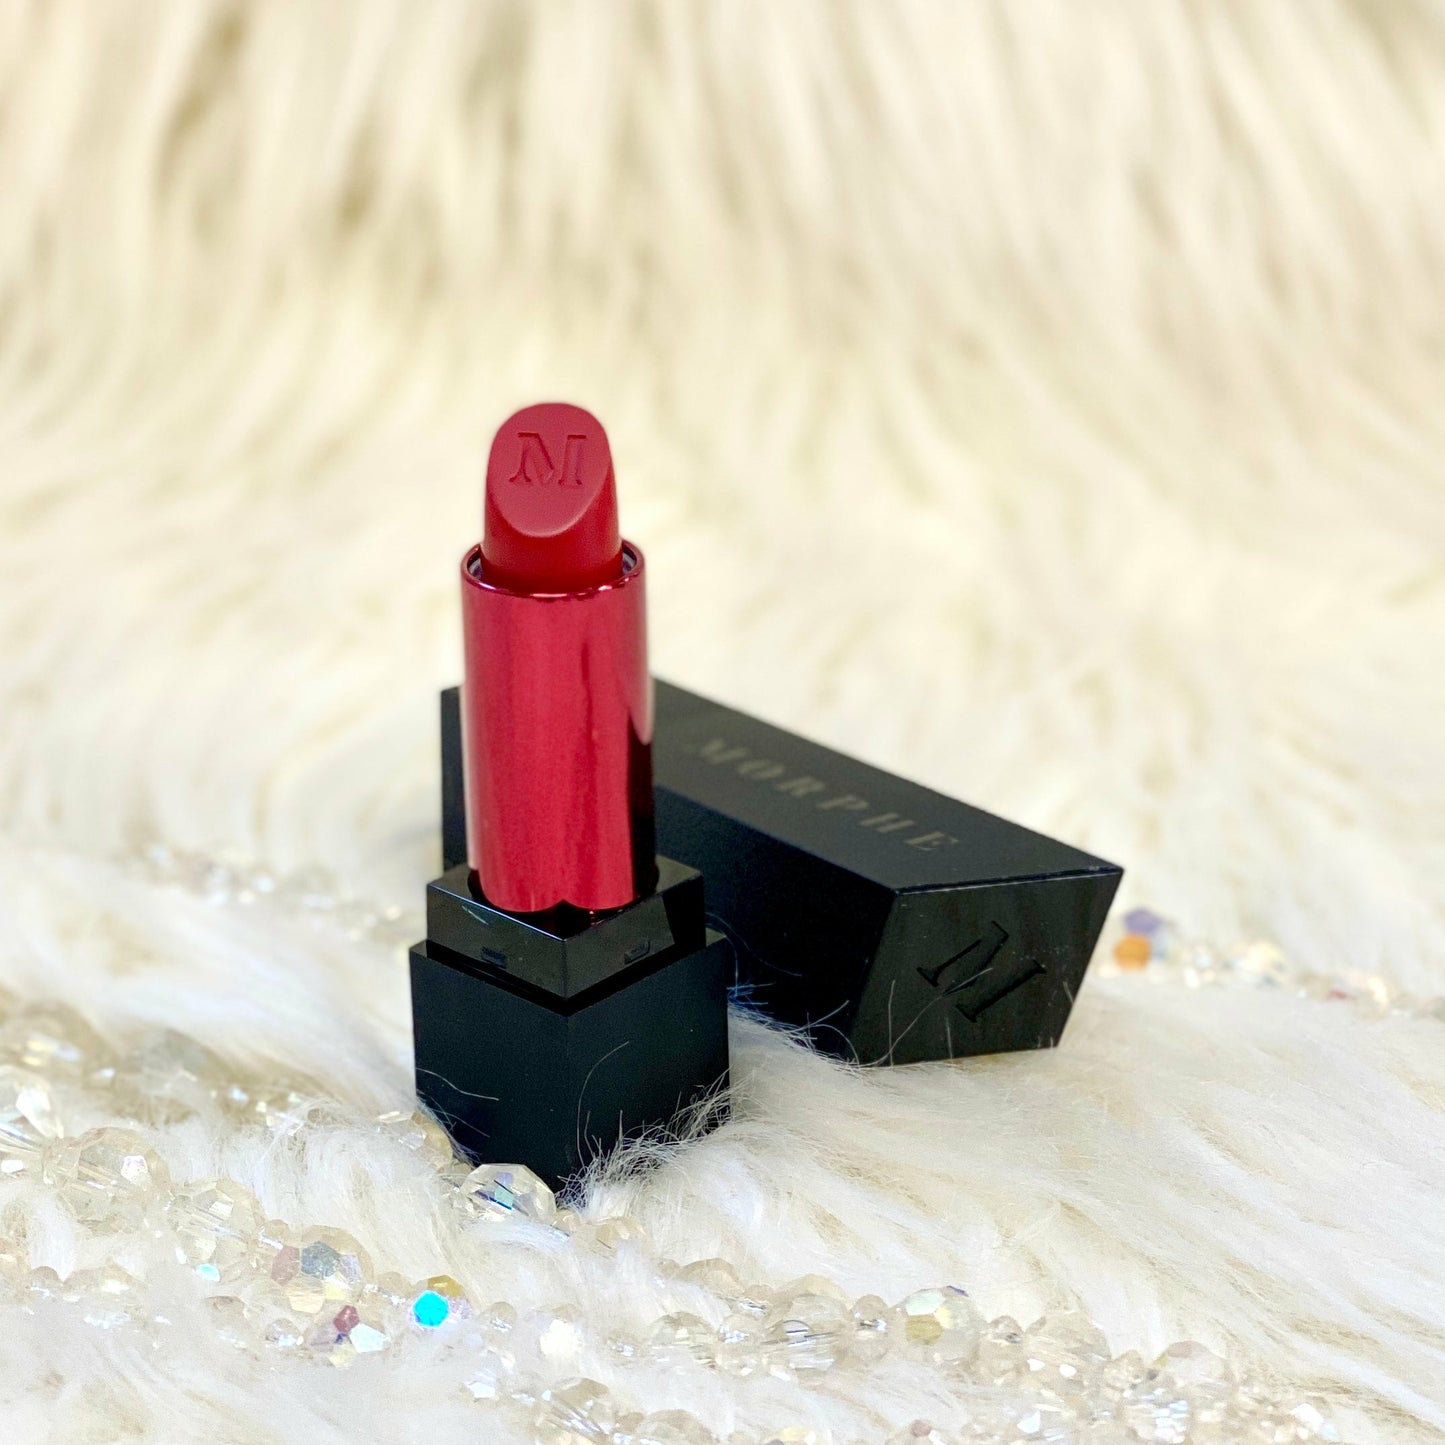 Mega Matte Lipstick Dominate  Knock 'em red with this long-wearing, creamy formula that Nikita Dragun slays by. Morphe Mega Matte Lipstick takes matte to the max. These deeply pigmented shades aren't afraid of commitment. It's a matte made in lipstick heaven.